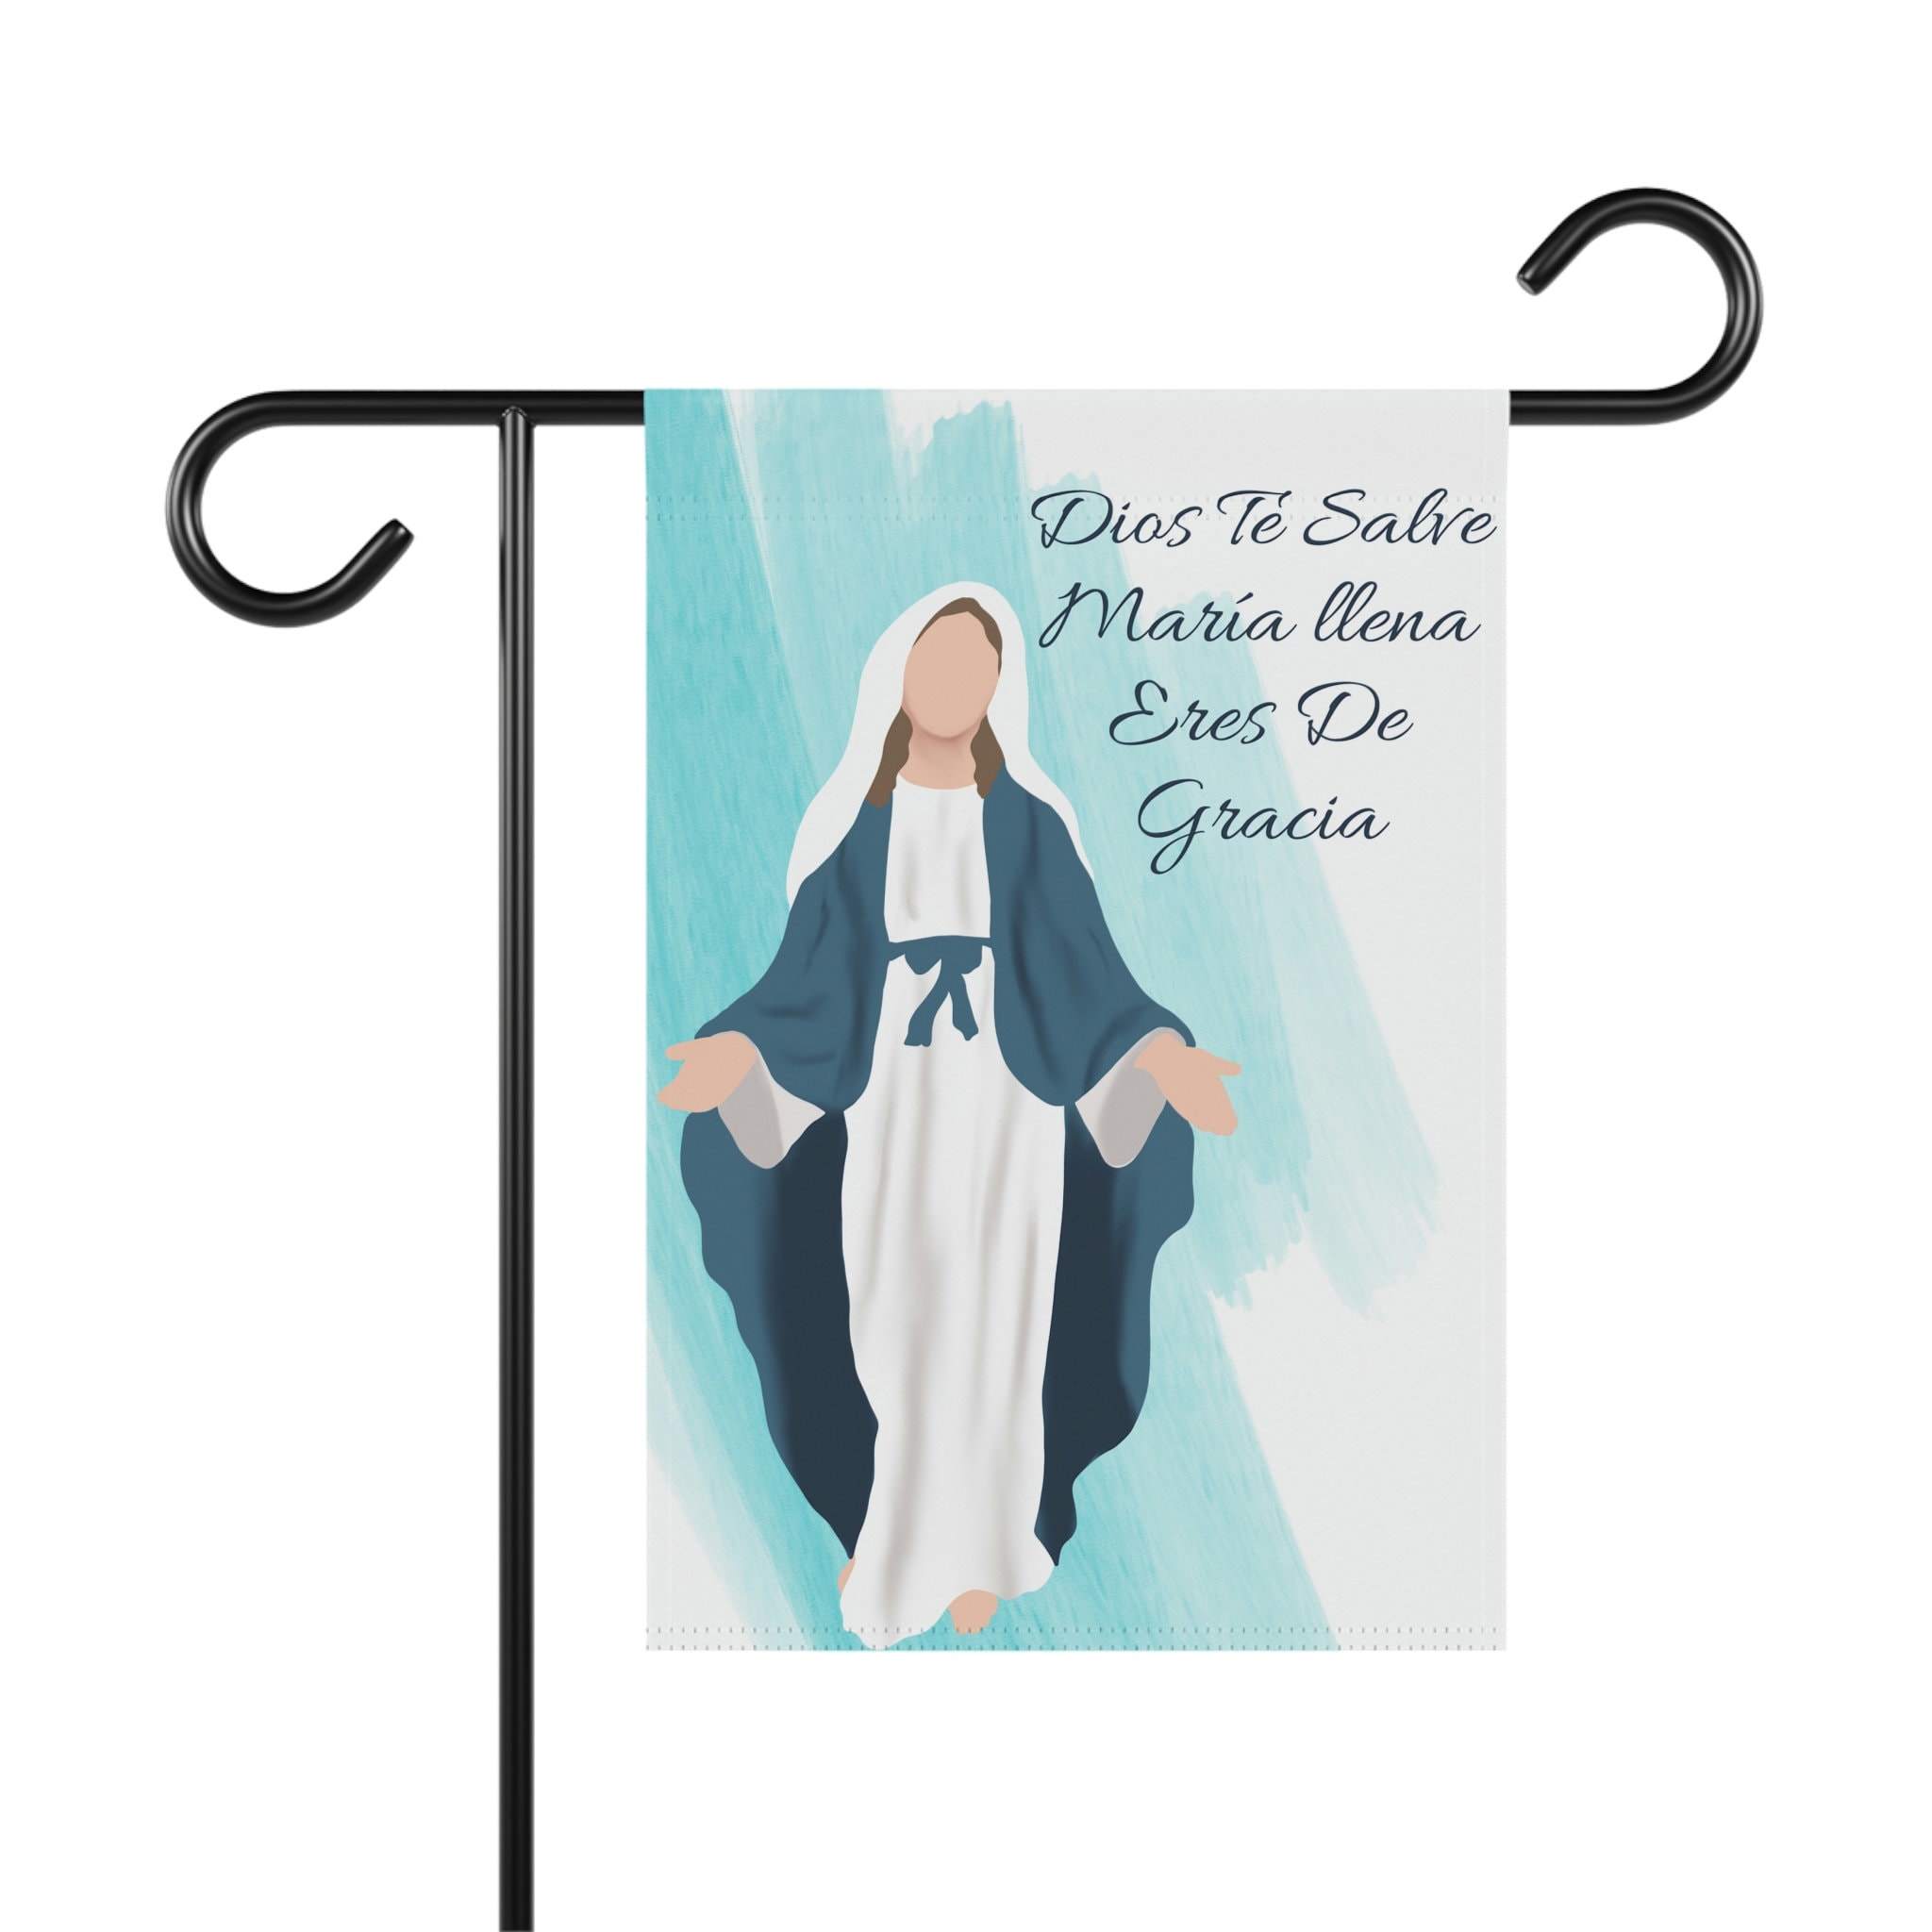 Catholic Stickers - Our Lady of Guadalupe